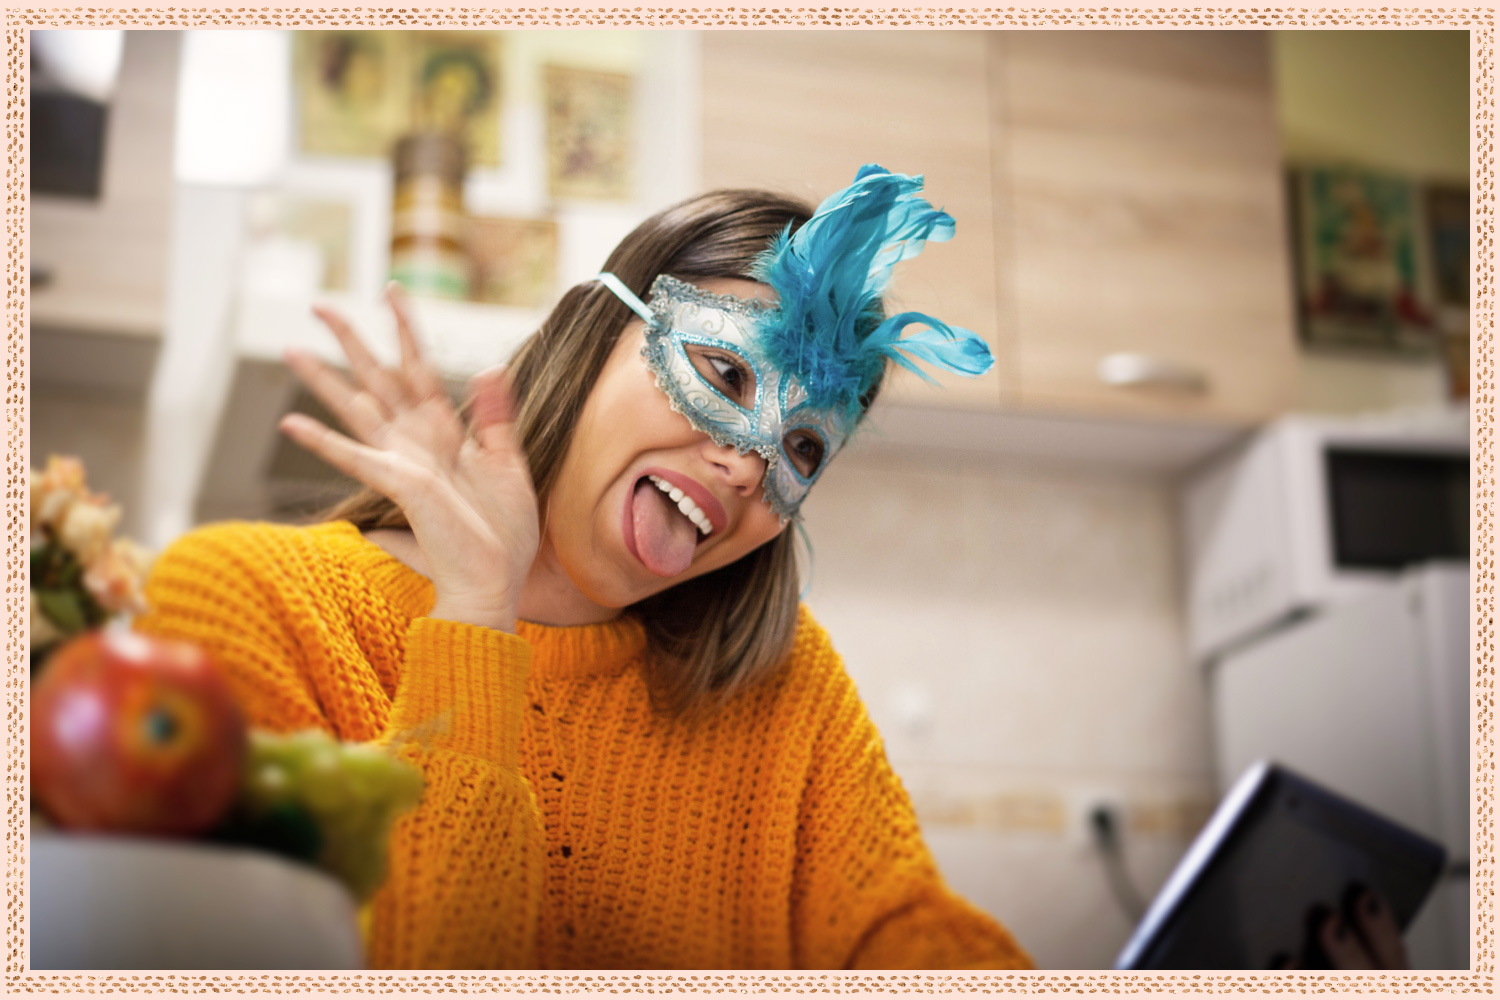 young woman with mask on sticking out her tongue and waving at tablet